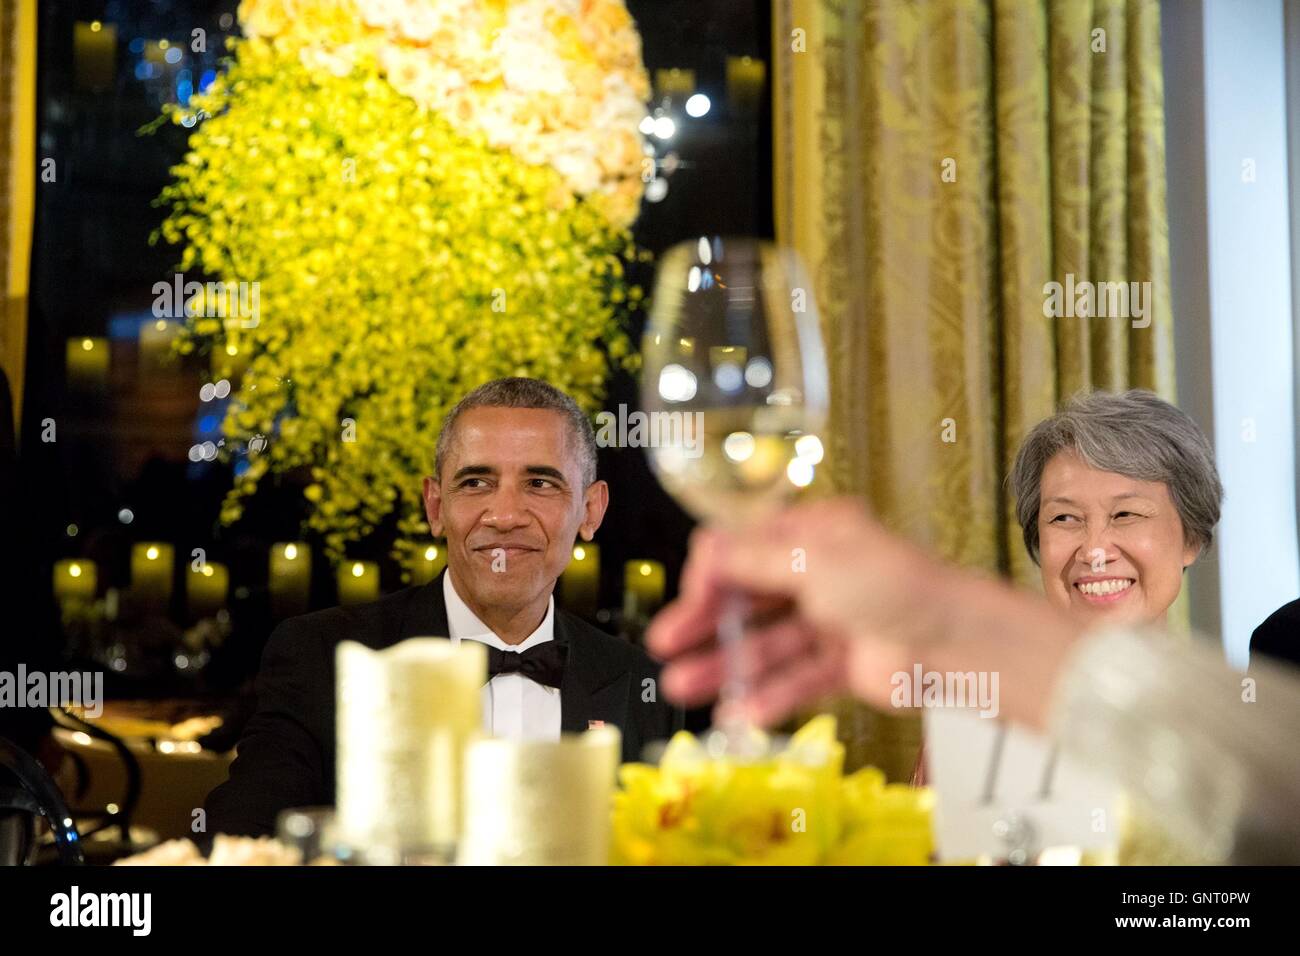 U.S President Barack Obama and Ho Ching, the wife of Singapore Prime Minister Lee Hsien Loong listen to a toast by her husband during the State Dinner in the East Room of the White House August 2, 2016 in Washington, DC. Stock Photo